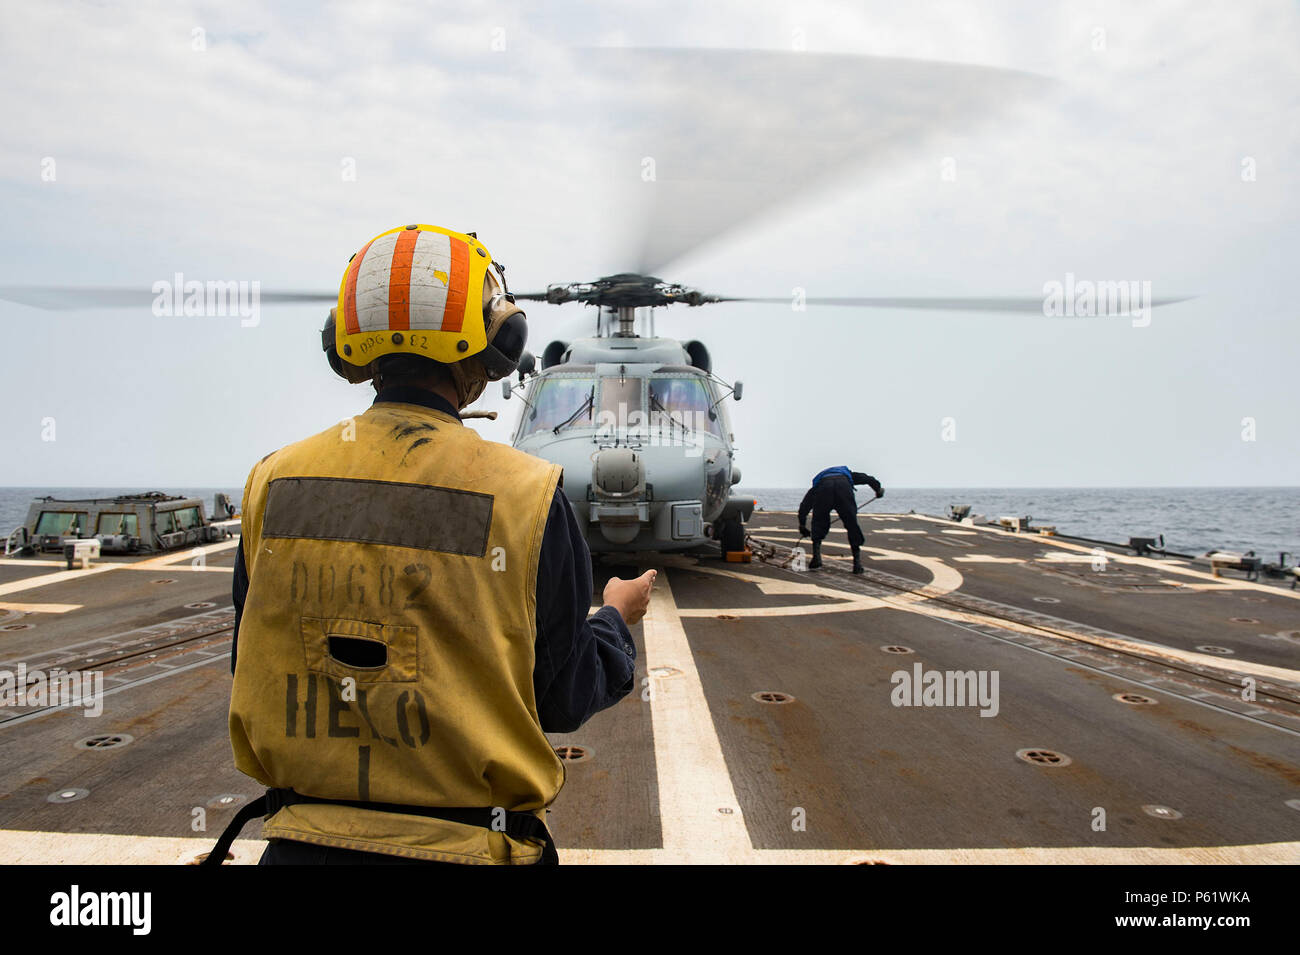 160406-N-MD297-033 PACIFIC OCEAN (April 6, 2016) - Sailors assigned to the Arleigh Burke-class guided missile destroyer USS Lassen (DDG 82) secure an MH-60R helicopter from the 'Jaguars' of Helicopter Maritime Strike Squadron (HSM) 60 to the ship's flight deck during flight operations. Lassen is currently underway in support of Operation Martillo, a joint operation with the U.S. Coast Guard and partner nations within the 4th Fleet area of responsibility. Operation Martillo is being led by Joint Interagency Task Force South, in support of U.S. Southern Command. (U.S. Navy photo by Mass Communic Stock Photo